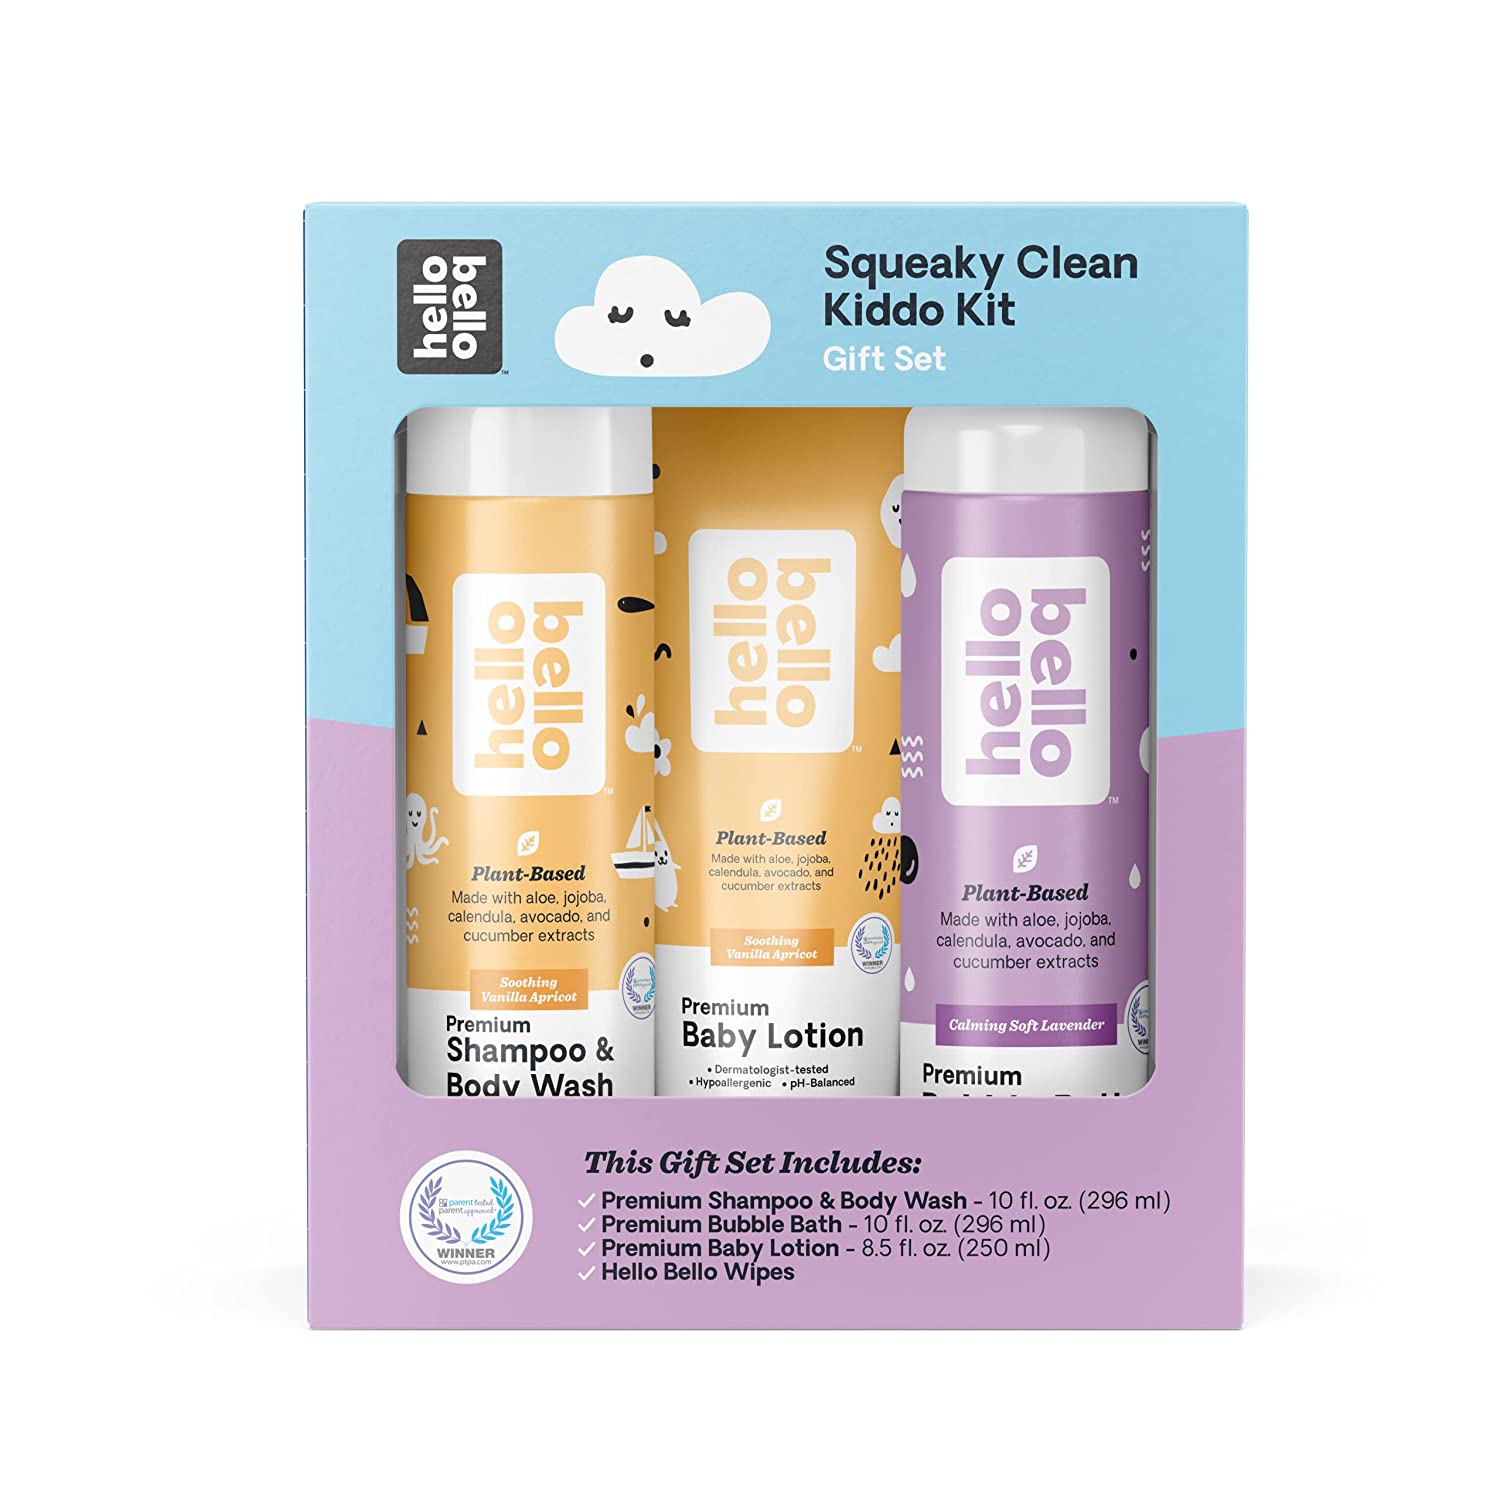 Hello Bello Break in Case of Baby Kit I Hypoallergenic Baby and Kid Gift Set with Shampoo & Body Wash, Bubble Bath, Lotion, Diaper Cream & Size 1 Diapers I Vegan and Cruelty Free